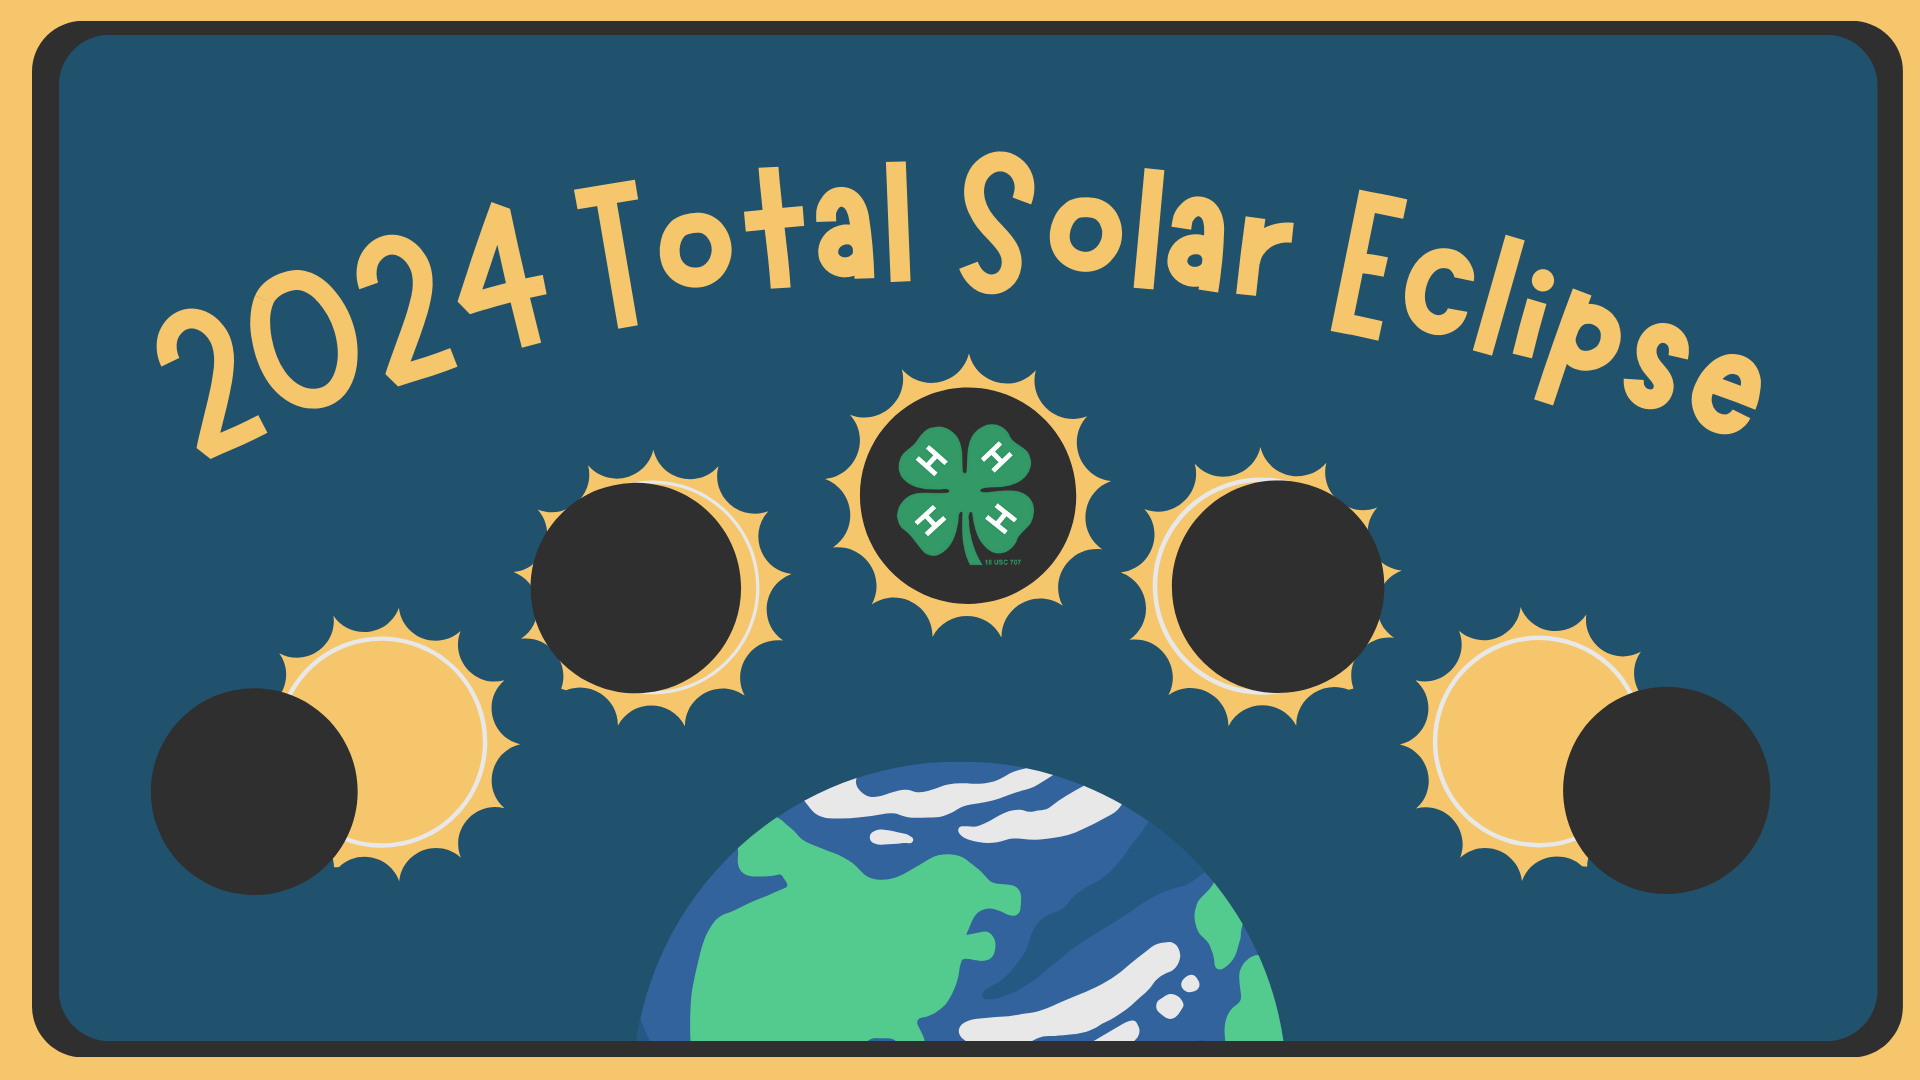 2024 Total Solar Eclipse written in gold font on a blue background. Phases of a solar eclipse are below with a green 4-H clover in the middle of one of the moons. Part of a globe is at the bottom of the page.